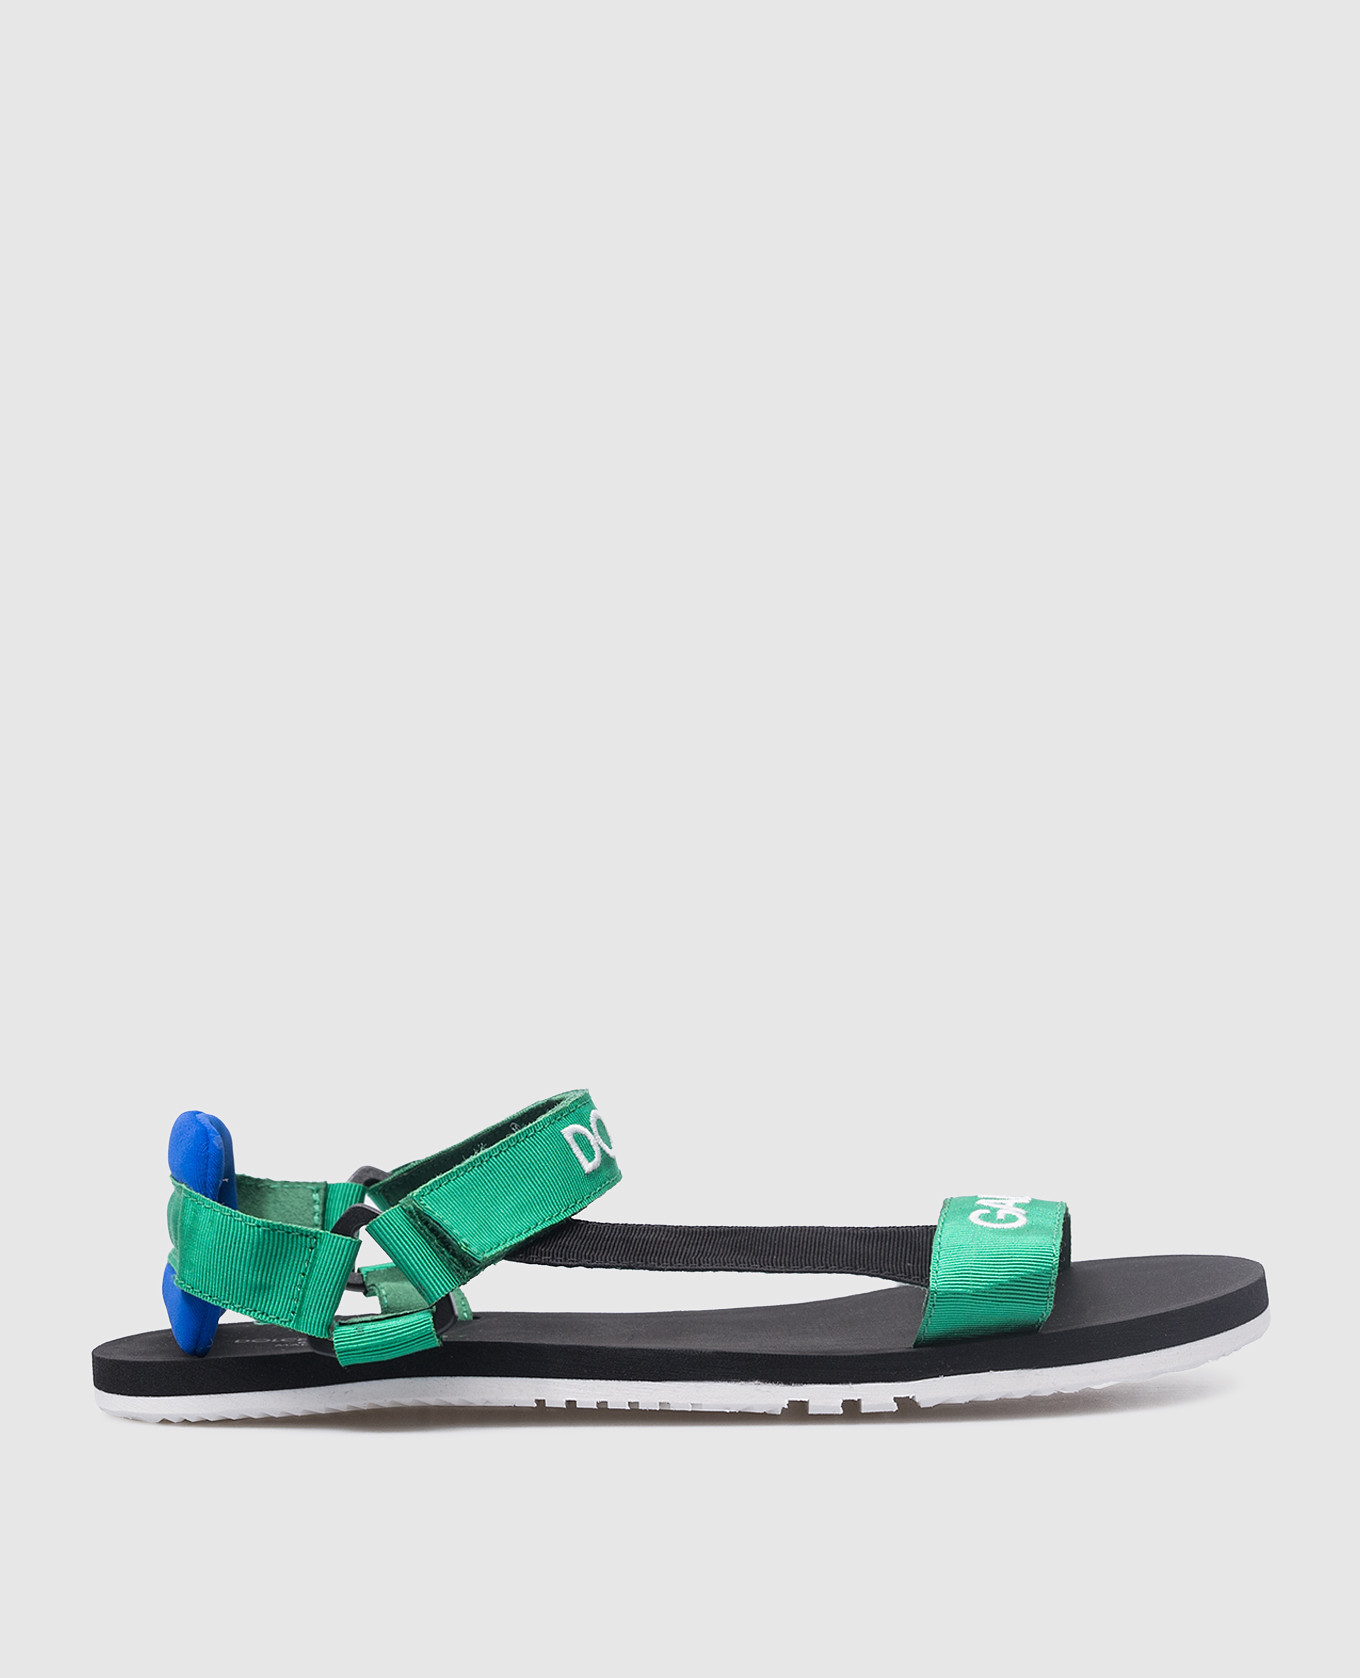 Children's green sandals with a logo